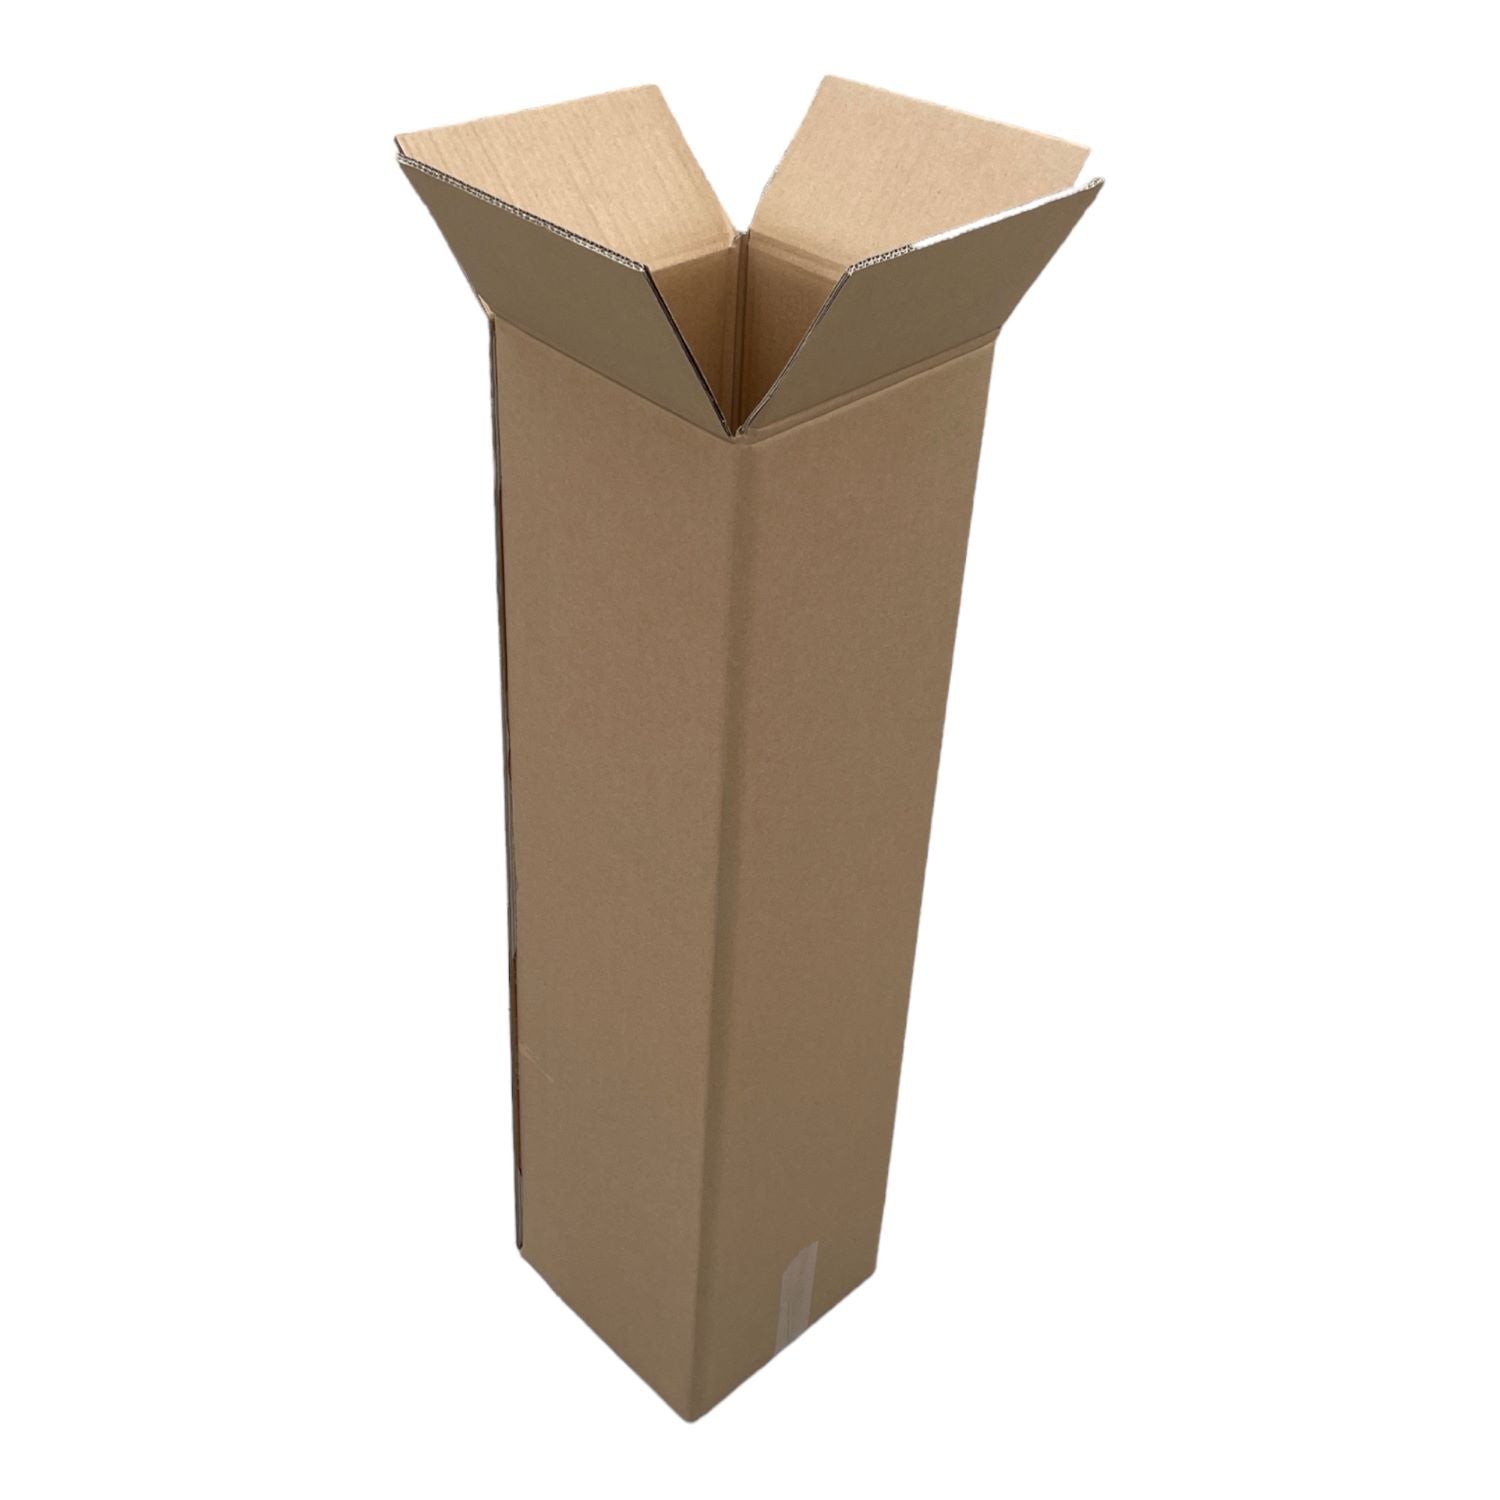 10 x 10 x 38 Long Corrugated Cardboard Boxes (Brown / Kraft) - Double  Wall, 200 lb test